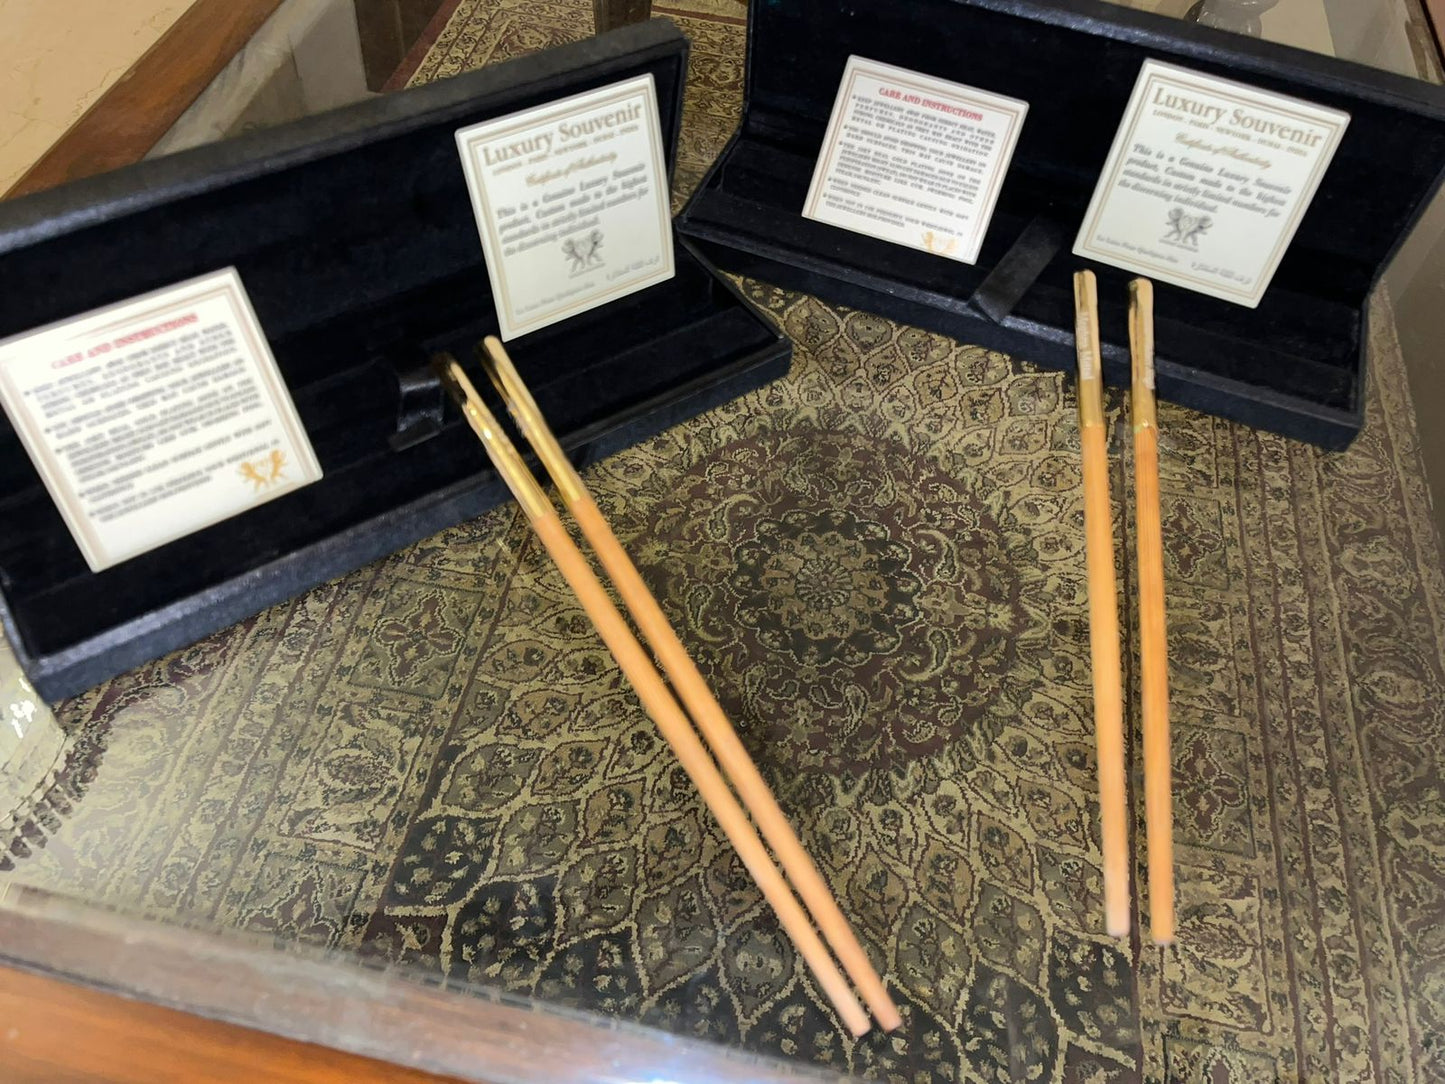 24Kt Gold Plated Monogrammed Chopsticks , One of a Kind Collectable.